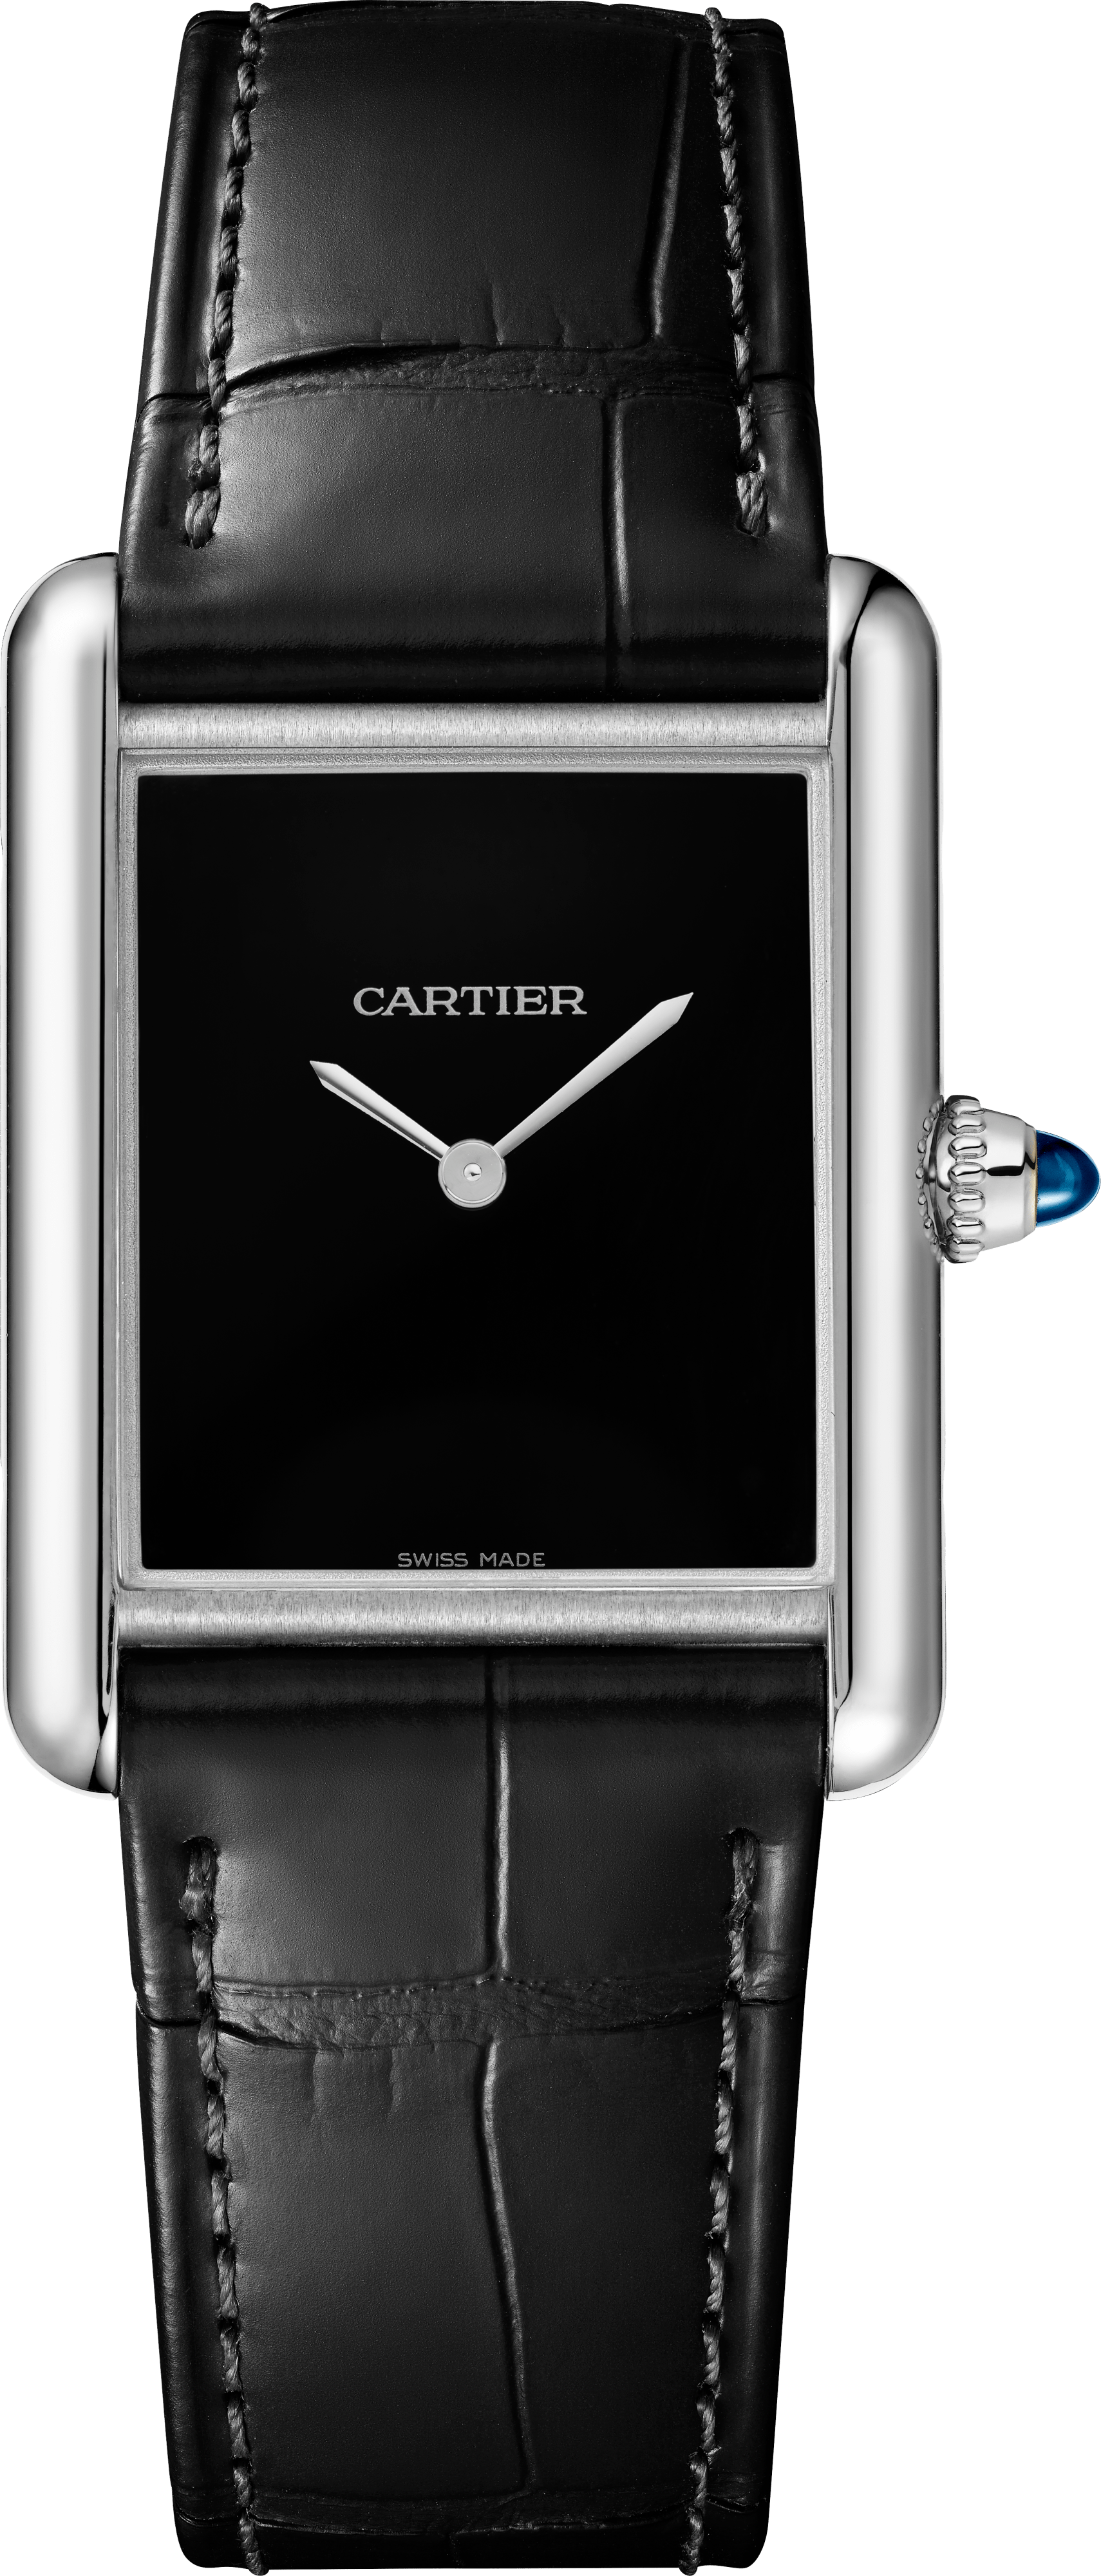 CARTIER TANK MUST-exchage-image